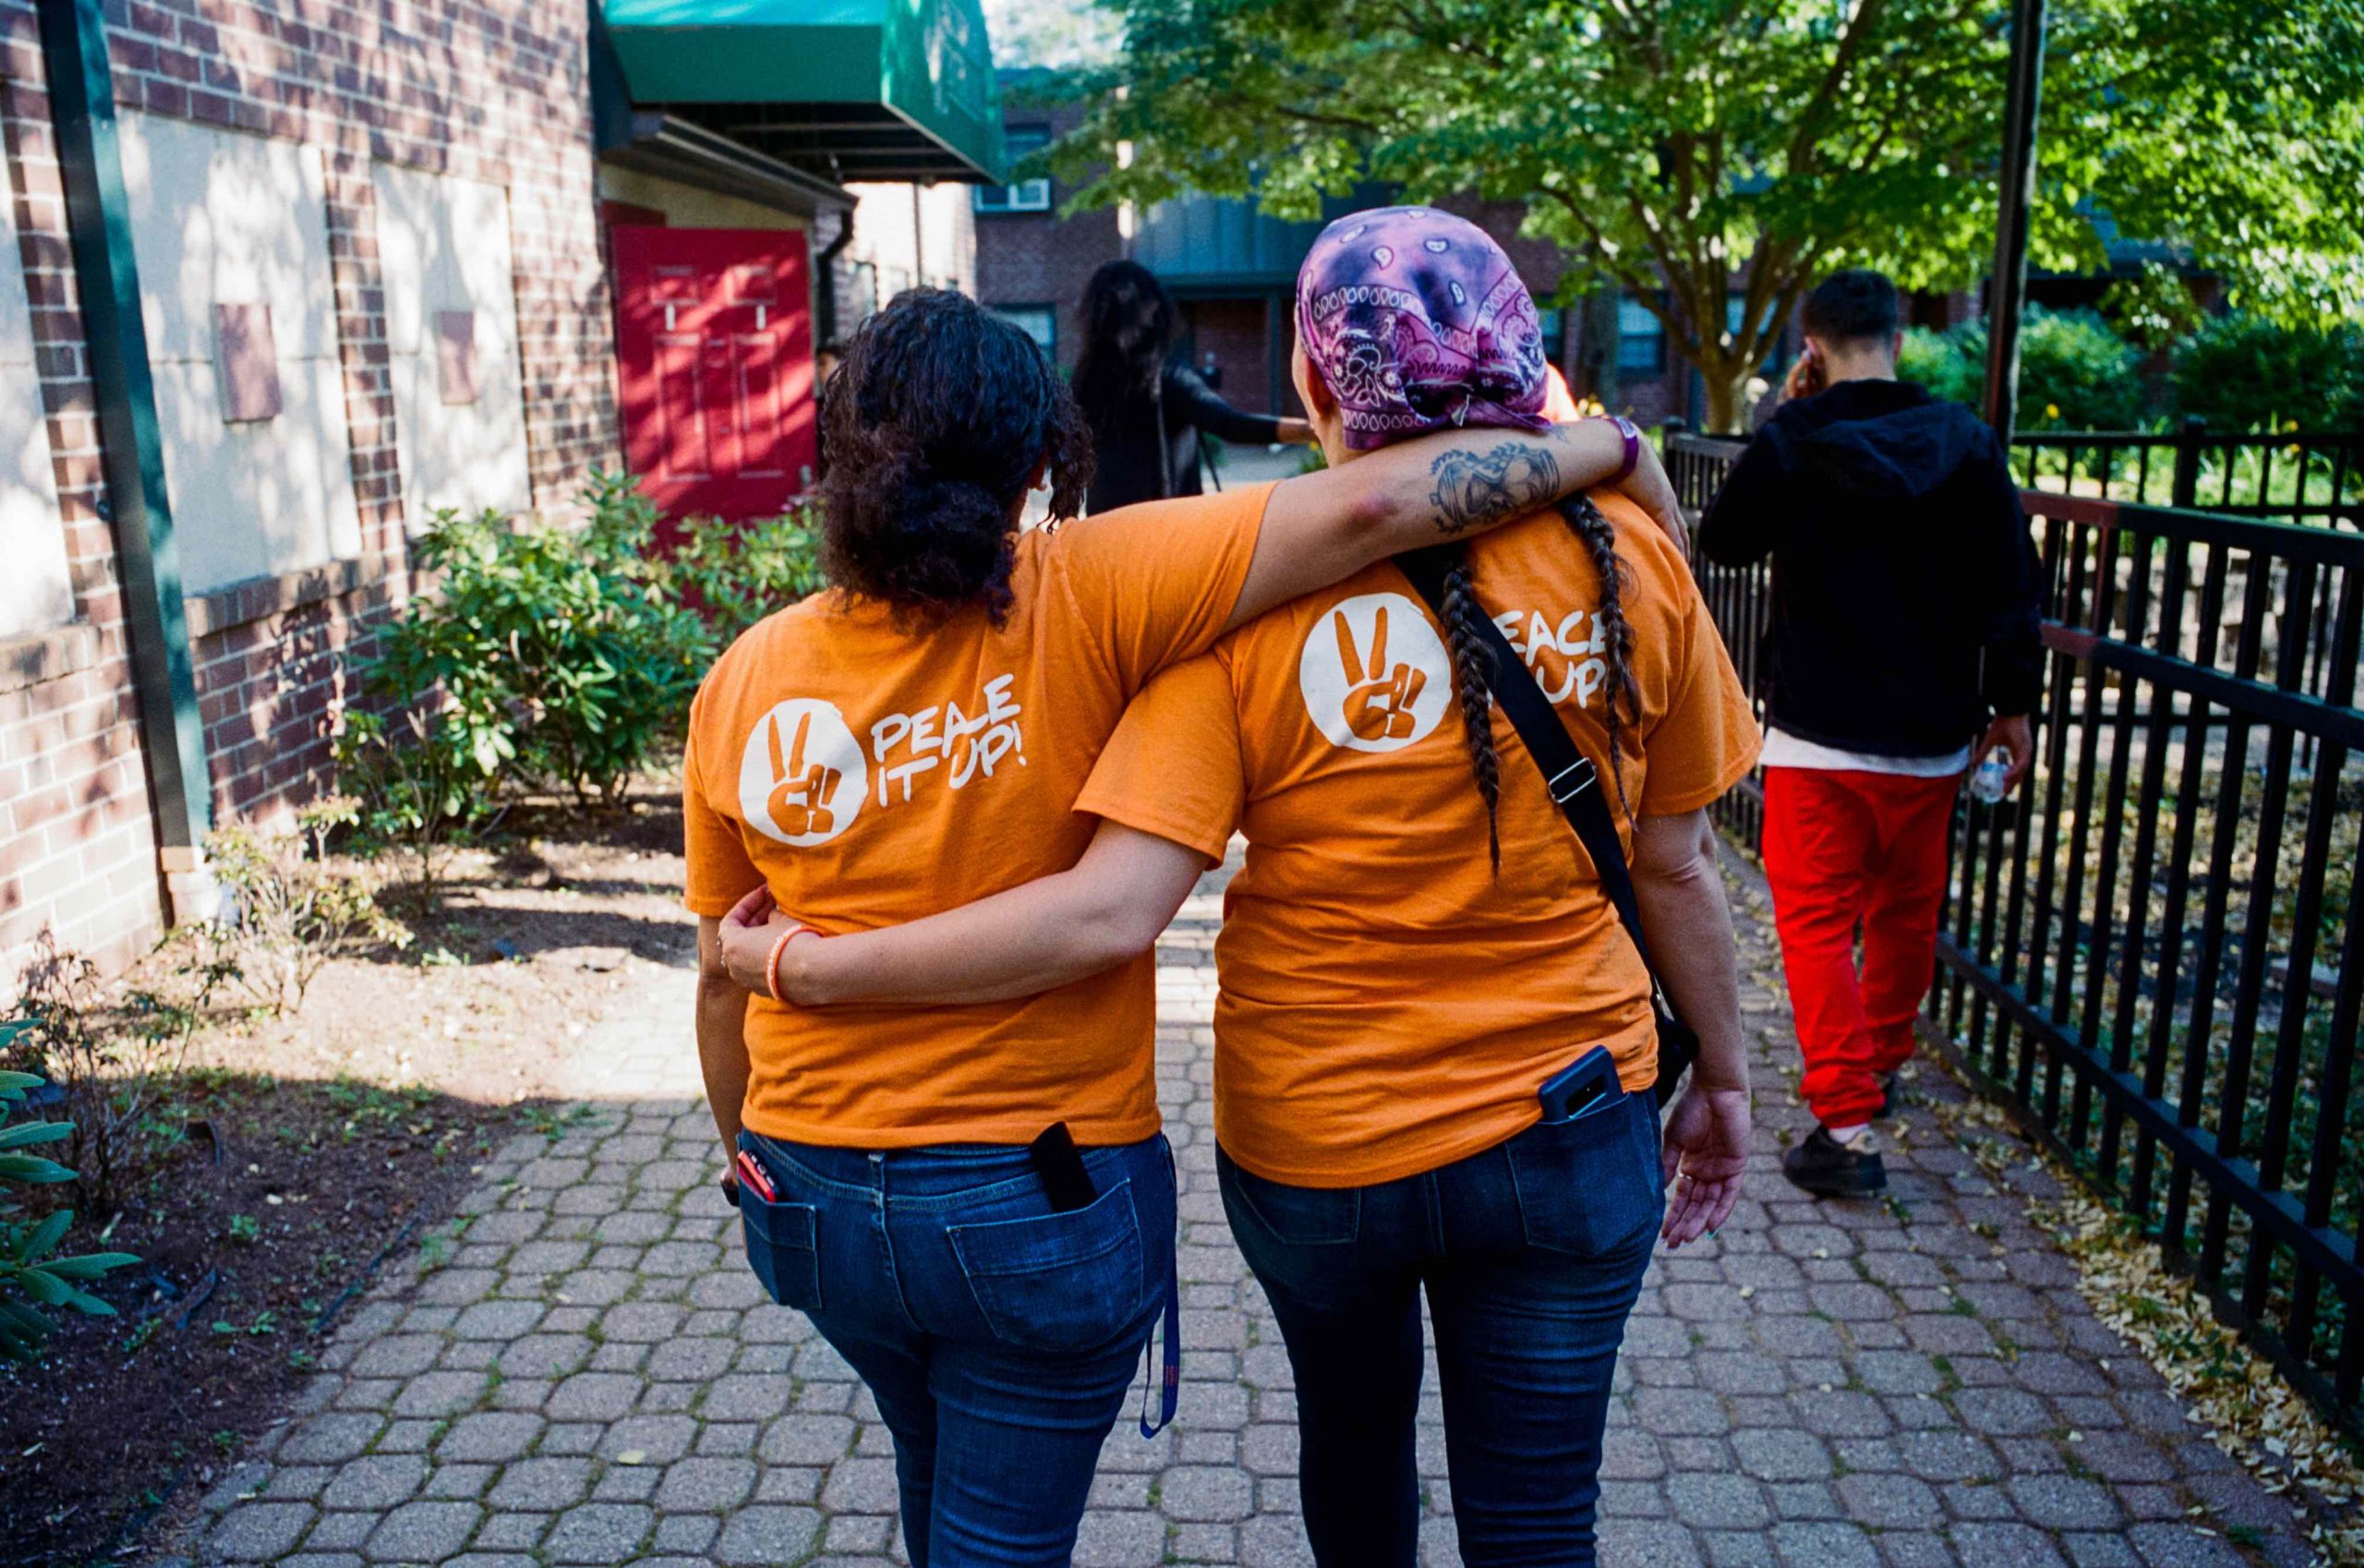 two women walking away from camera wearing jeans and orange t-shirts with Peace it up written on the back